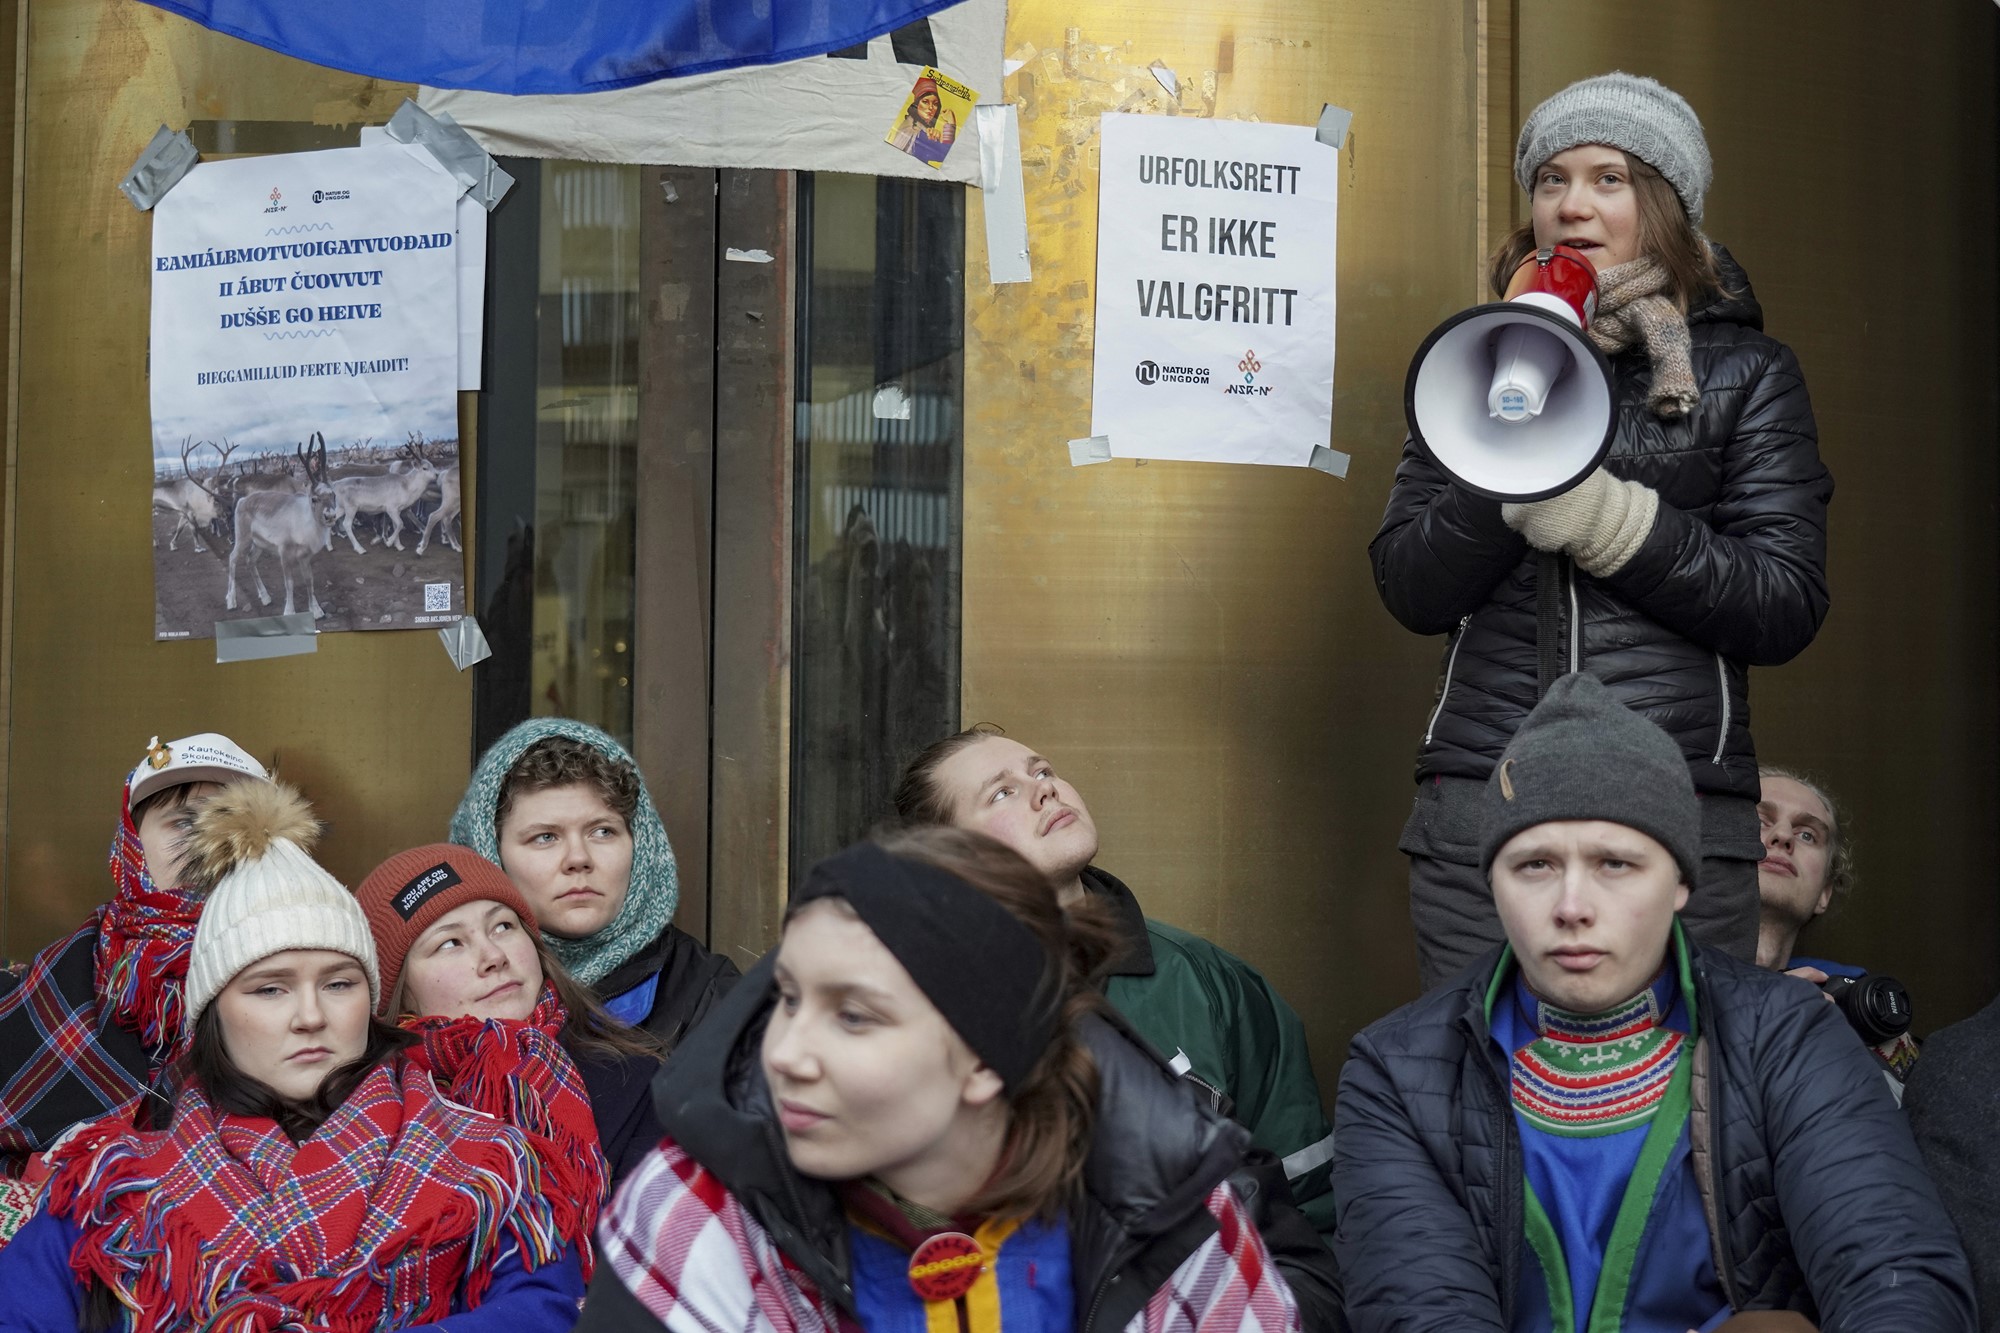 Greta Thunberg stands with a megaphone in the middle of a group of seated teenagers next to a door with taped up signs. 